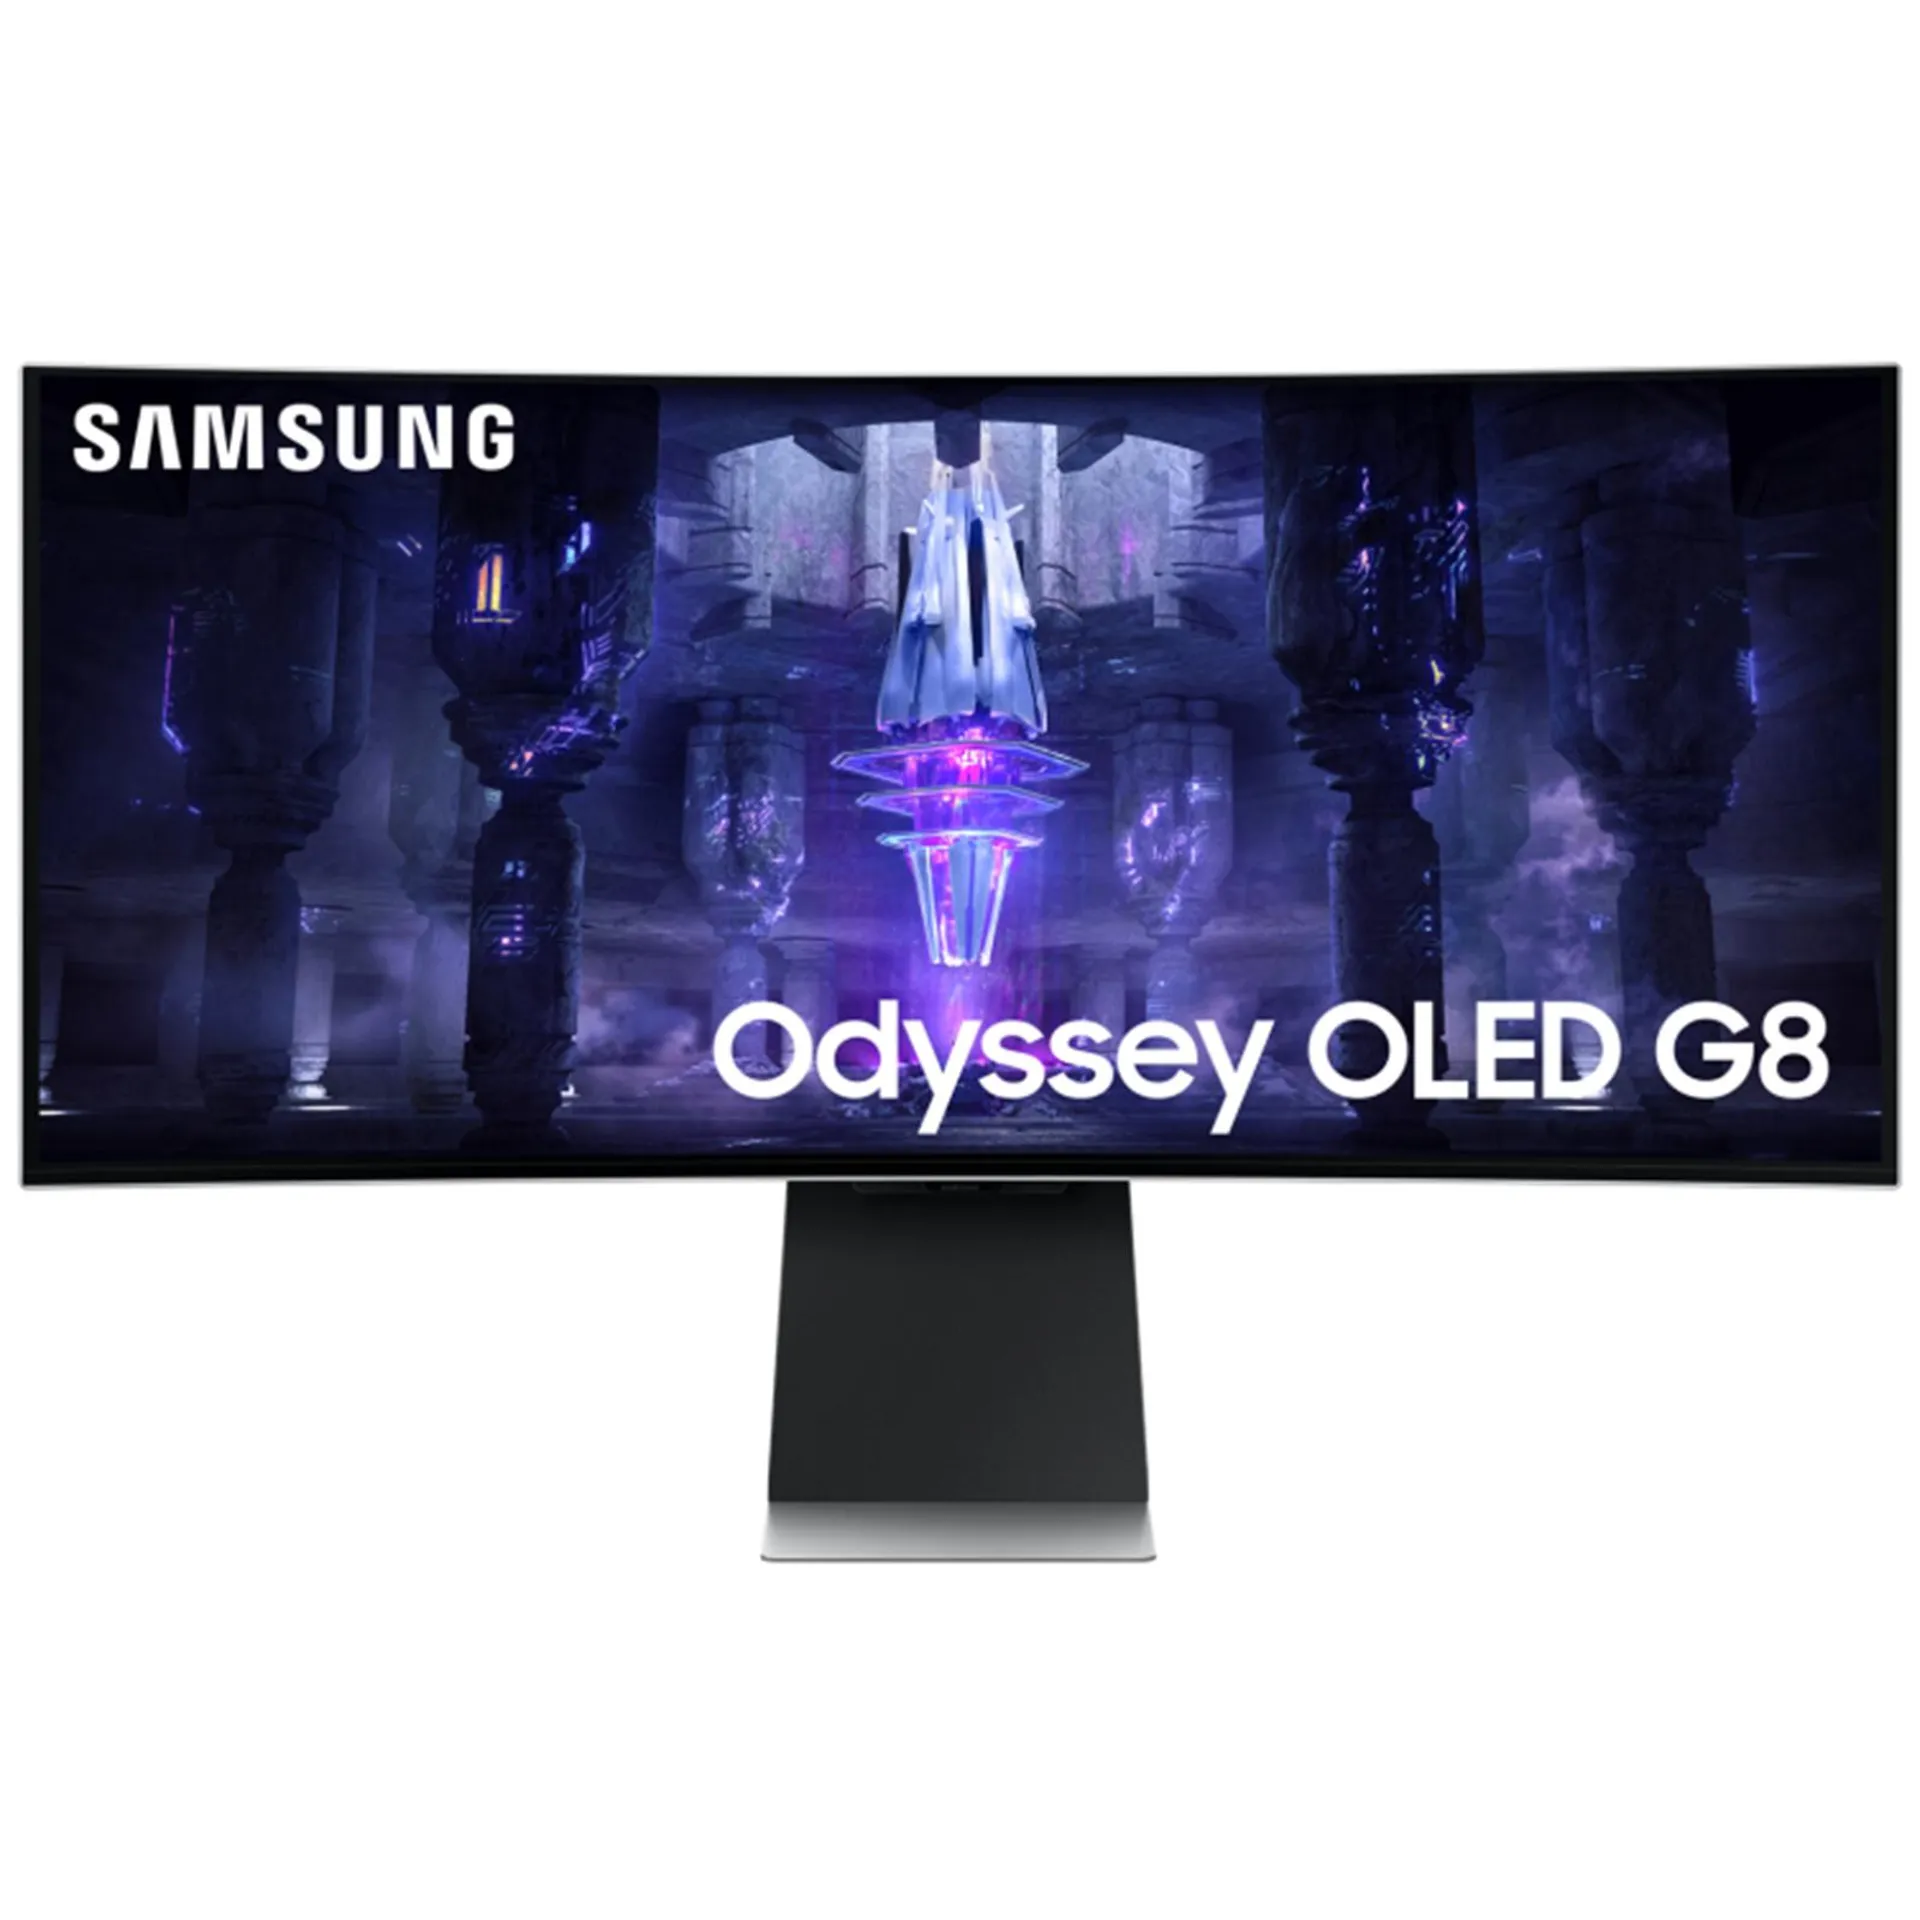 Samsung Odyssey OLED G8 34" Ultrawide 175Hz Curved Gaming Monitor